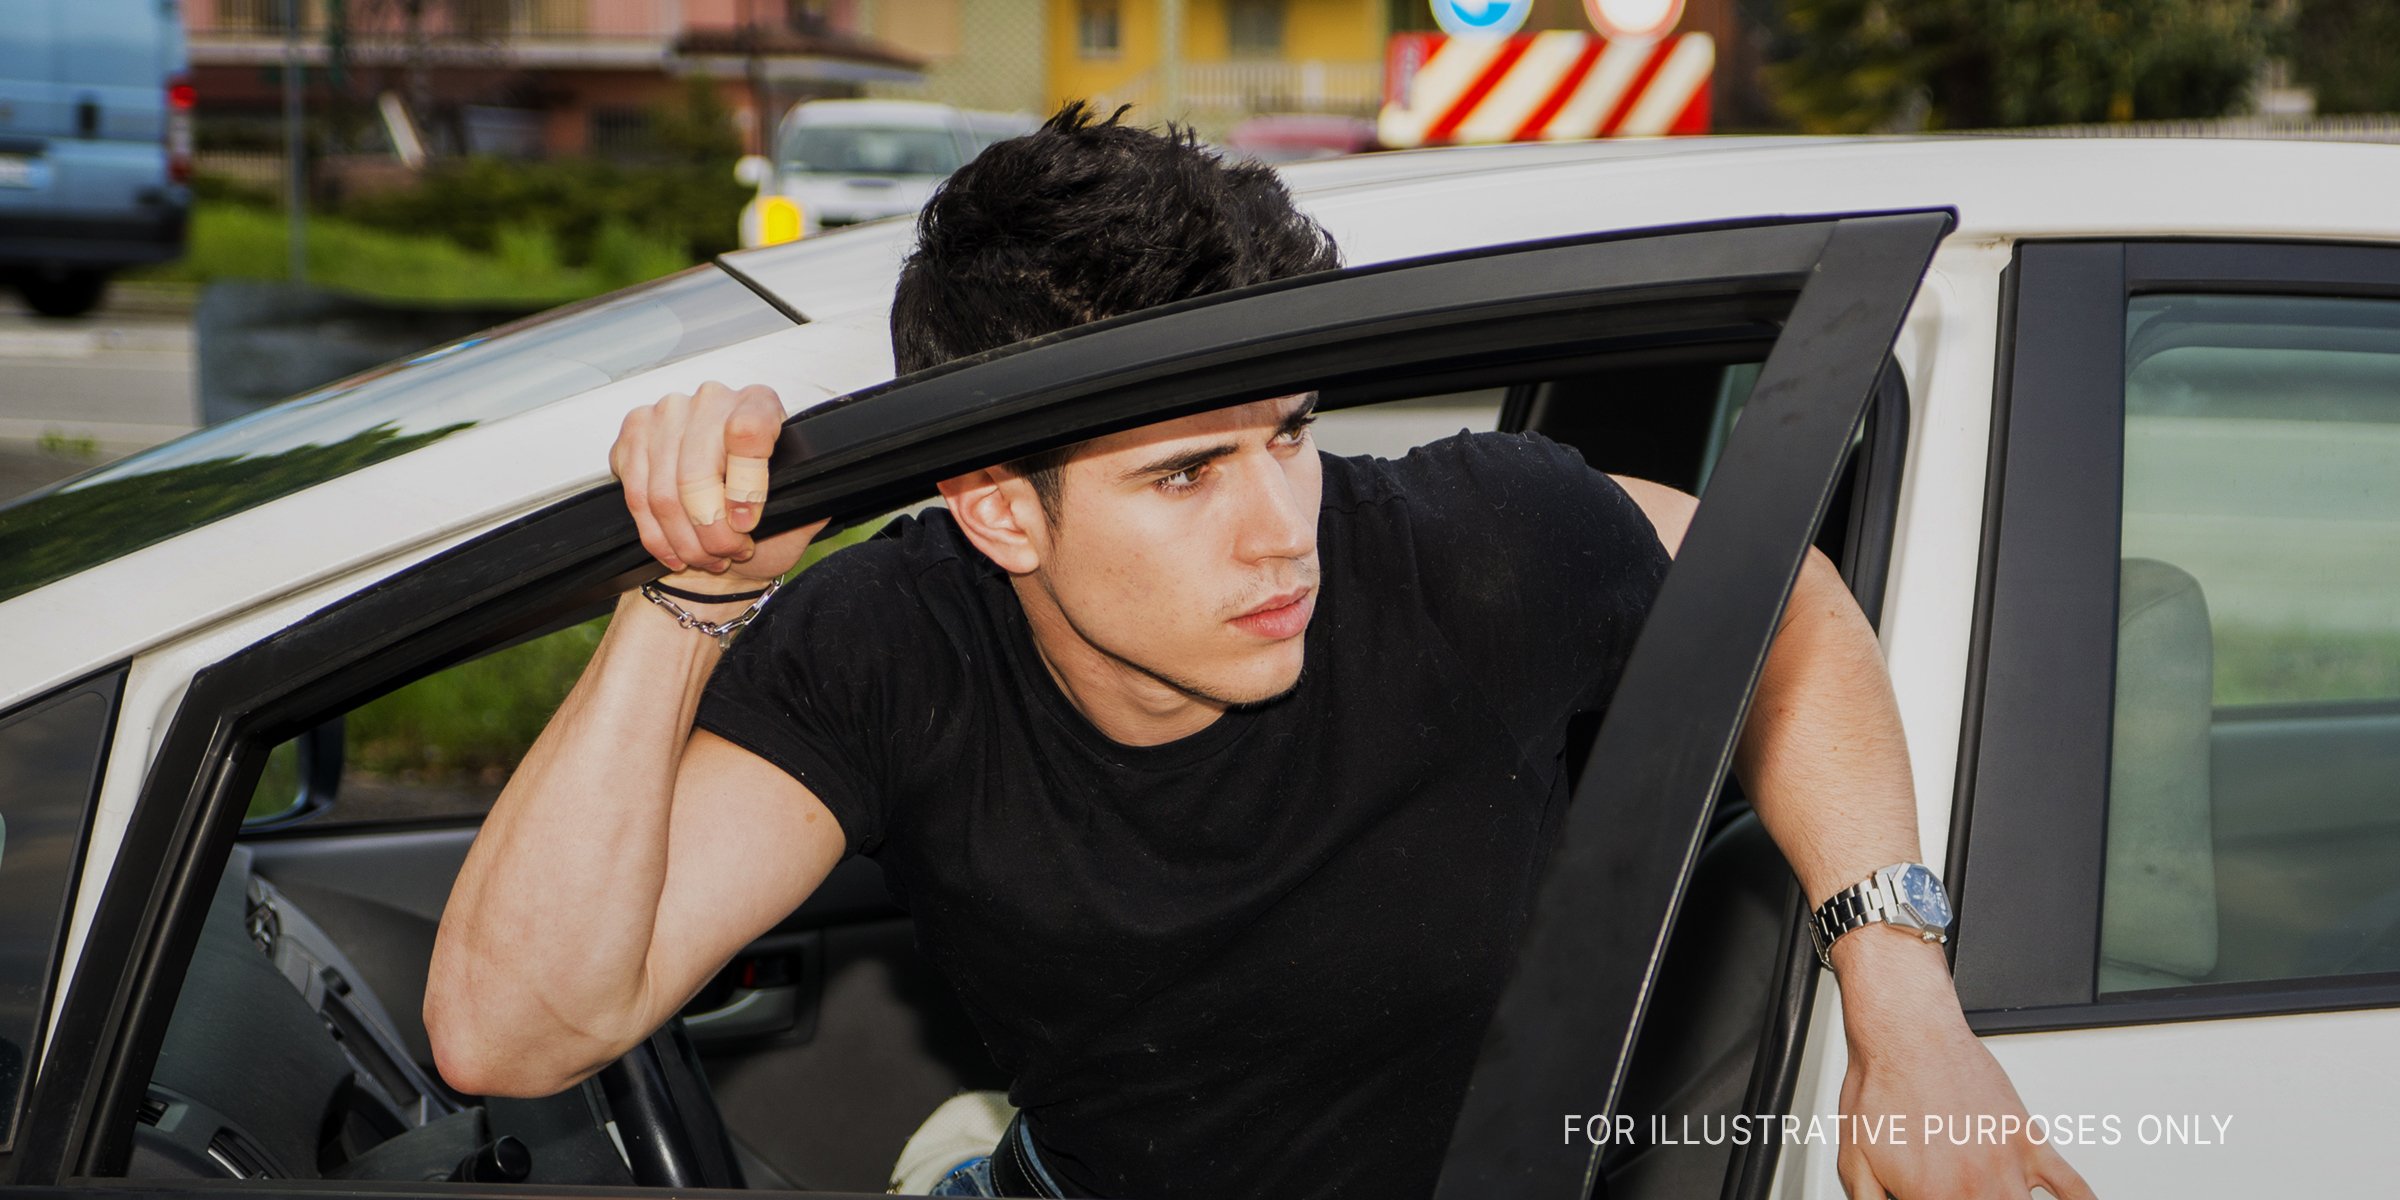 Young man exiting car | Source: Shutterstock